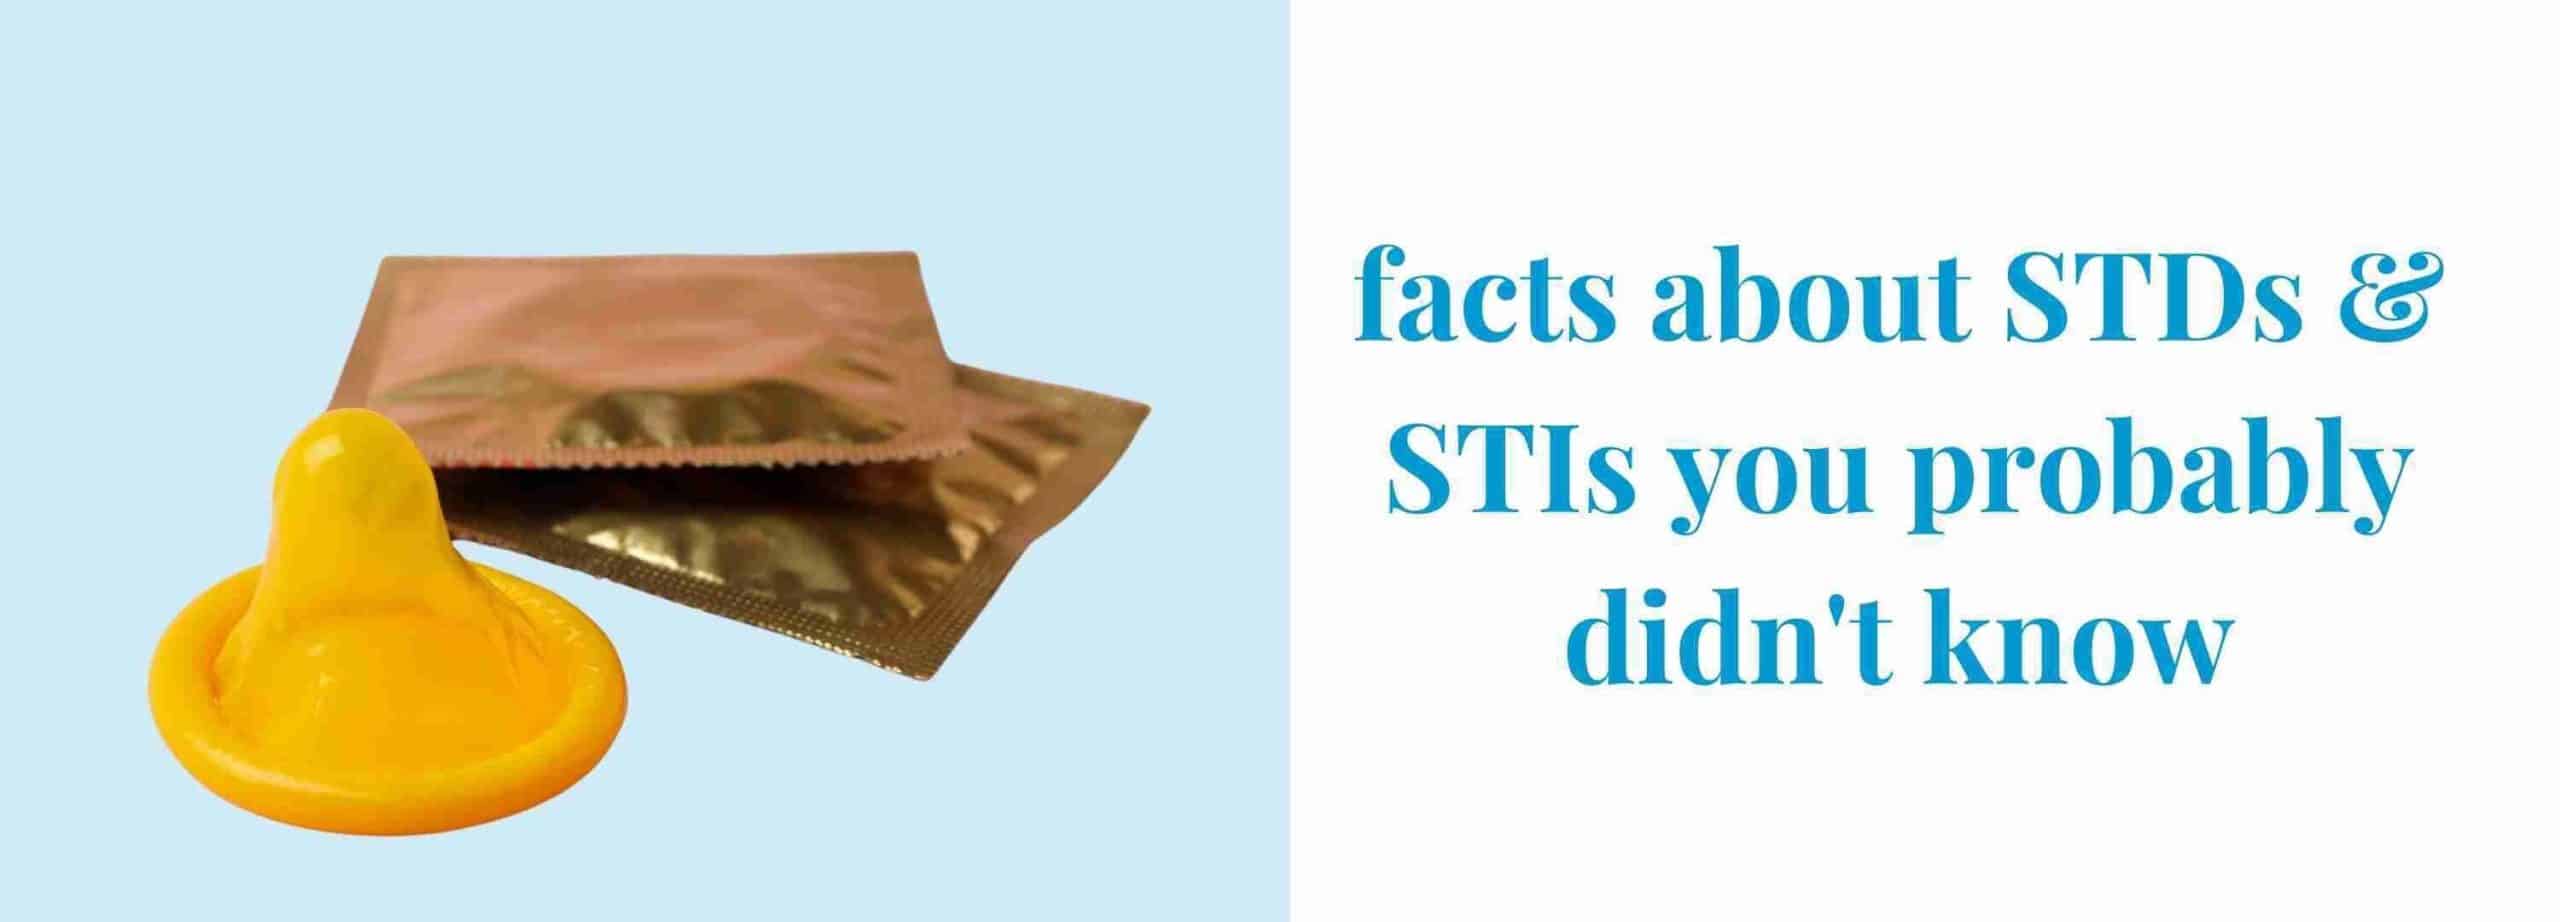 facts about STDS